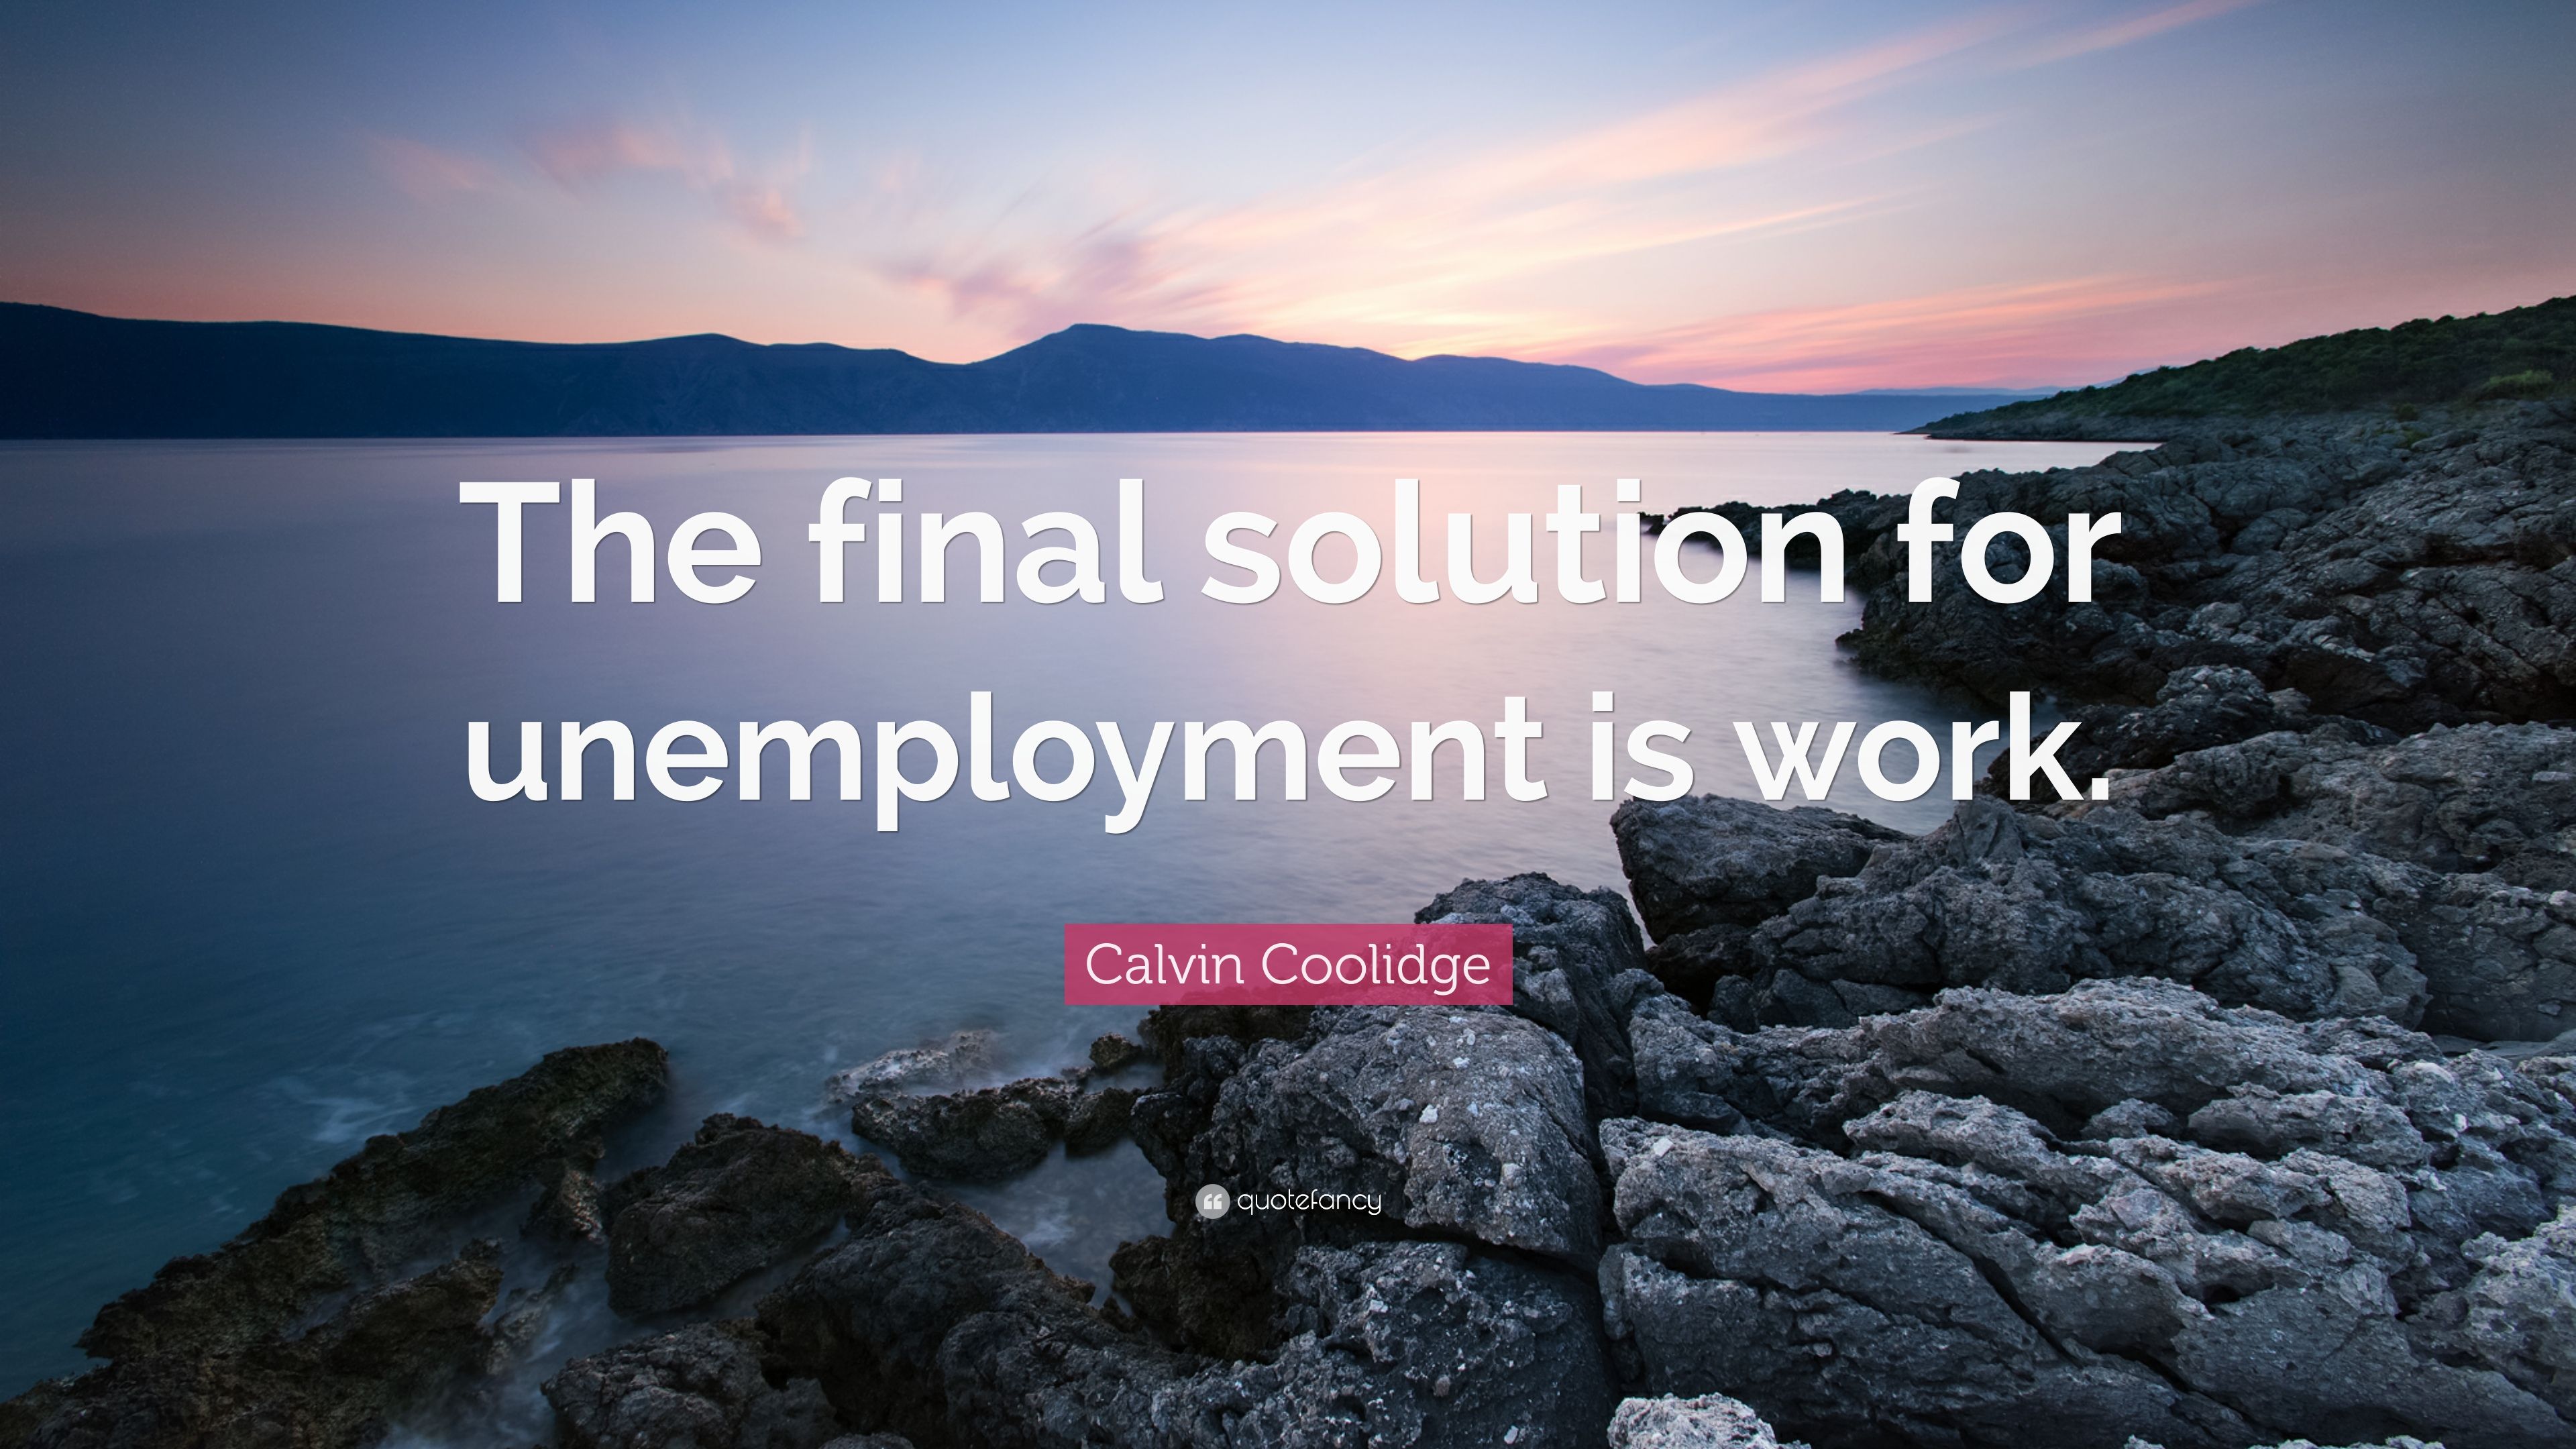 Calvin Coolidge Quote: “The final solution for unemployment is work.” (12 wallpaper)